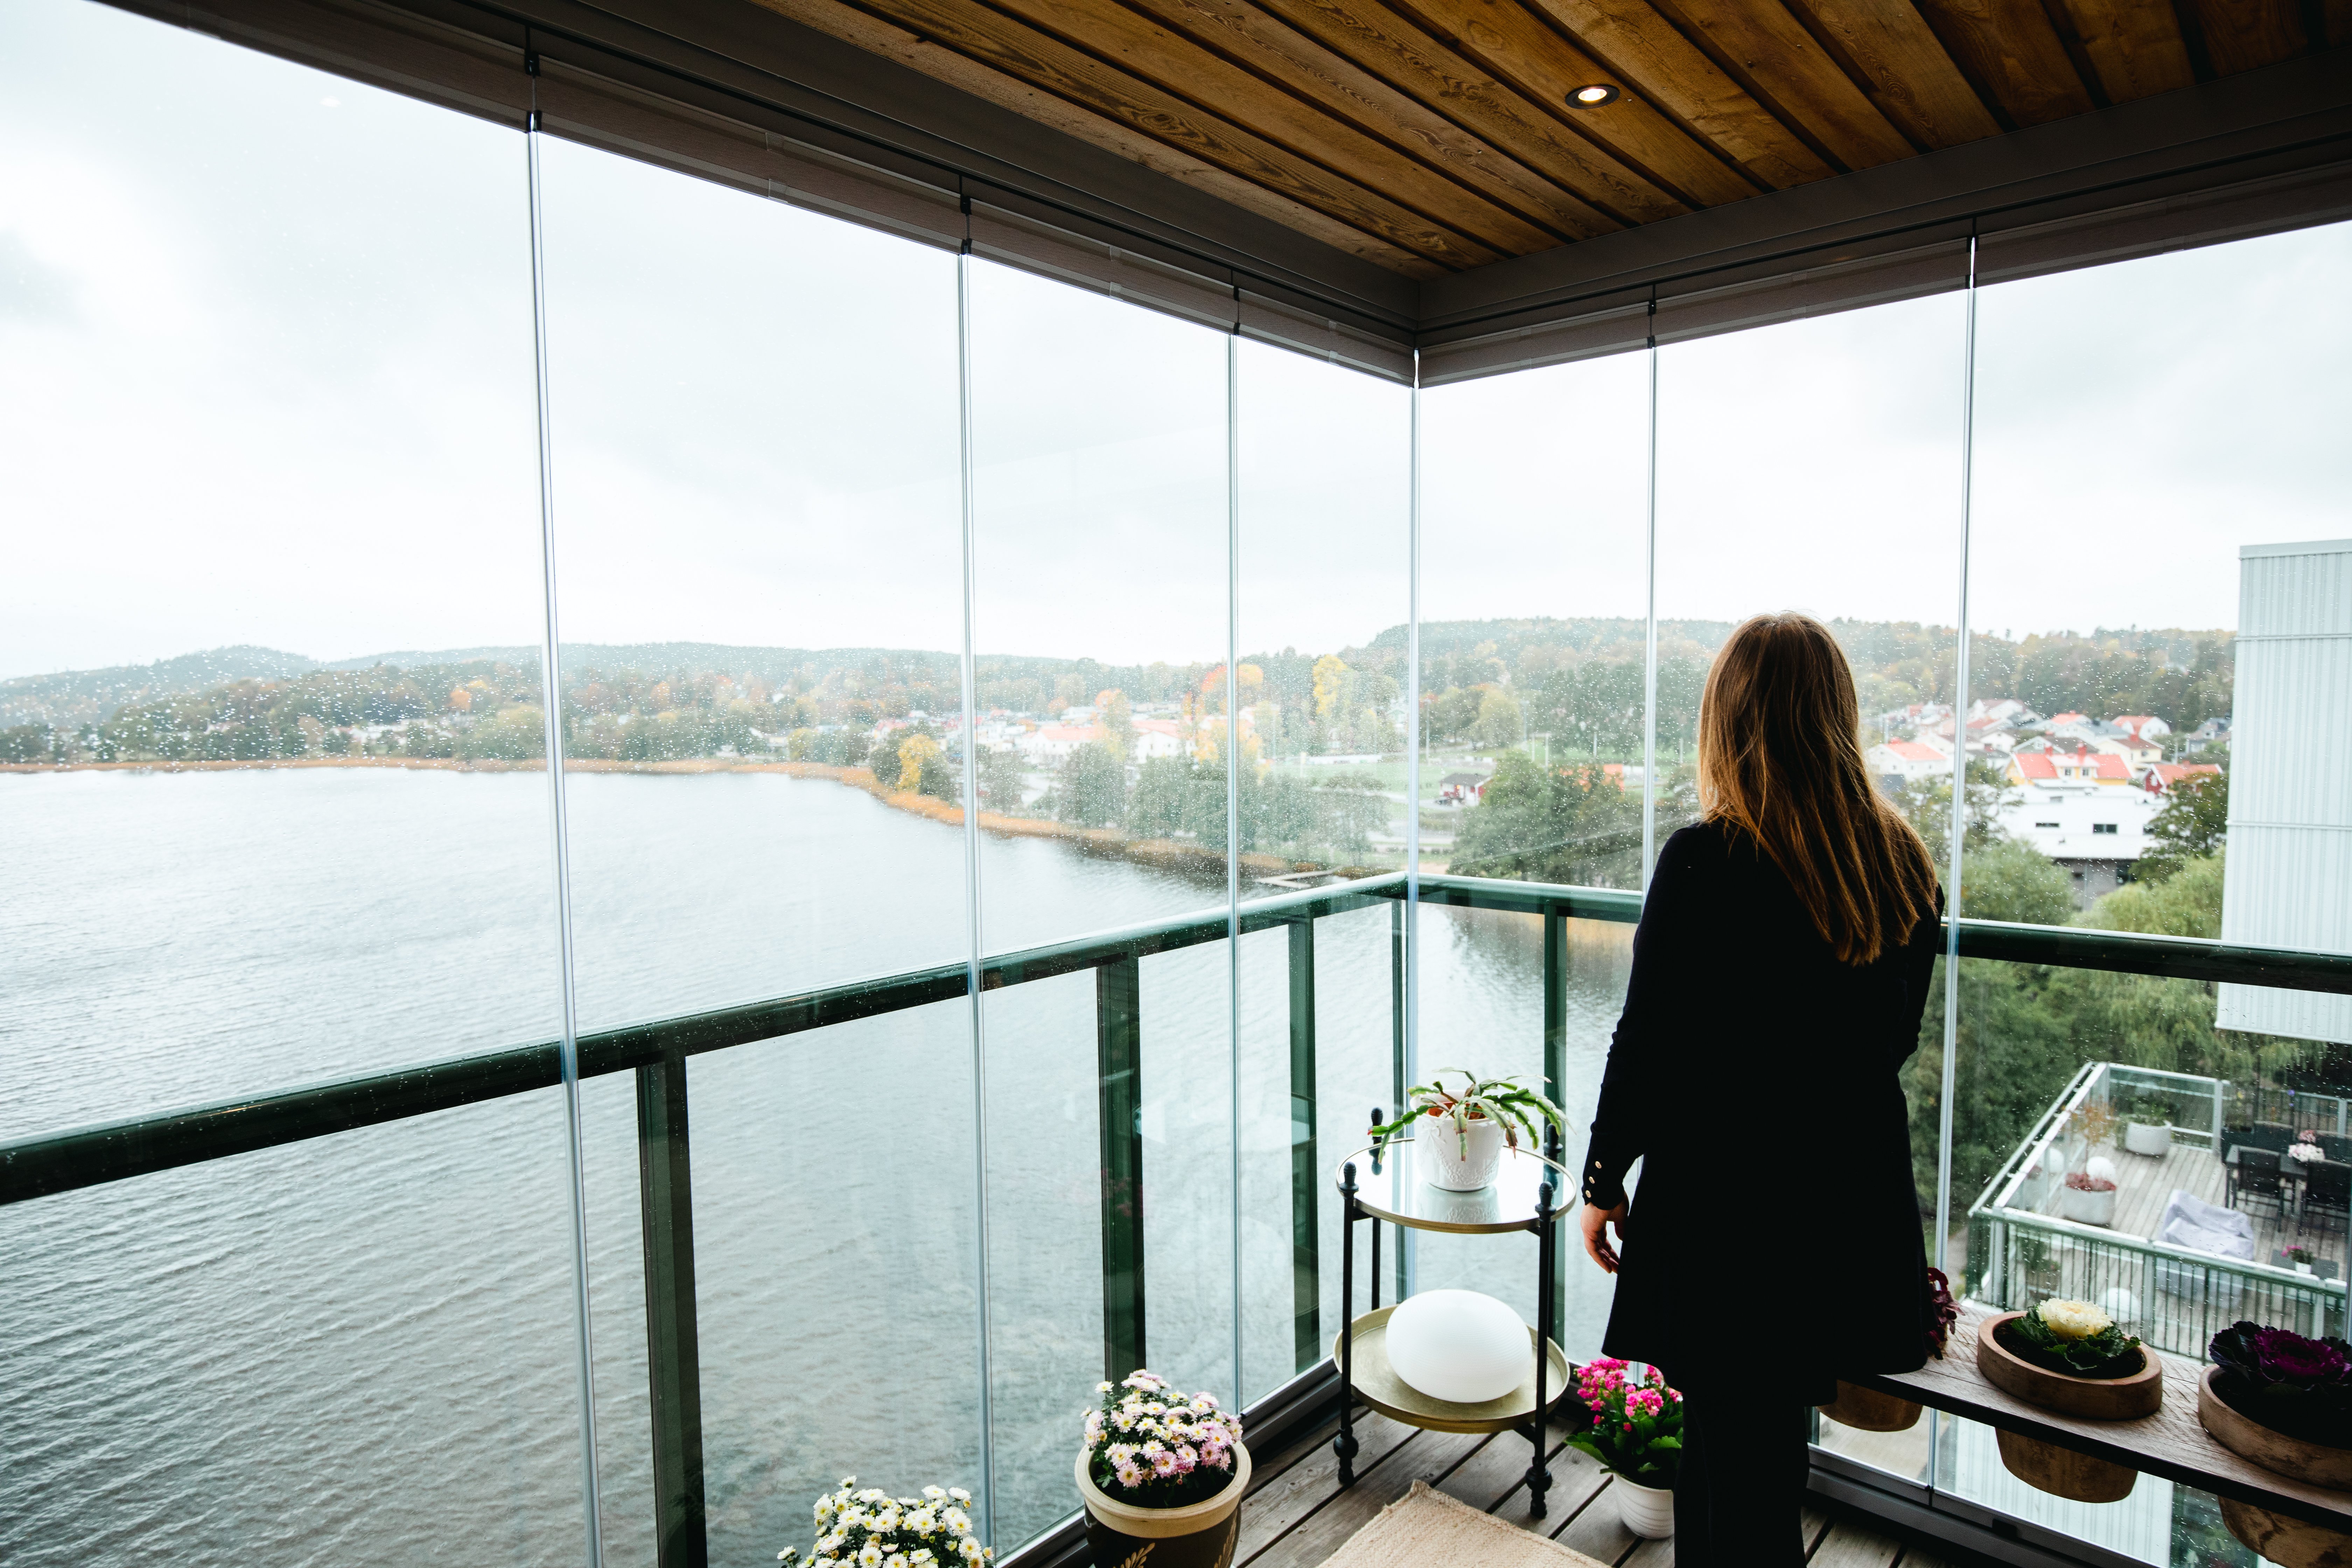 Girl looking out at scenery with lake and trees from a glazed balcony